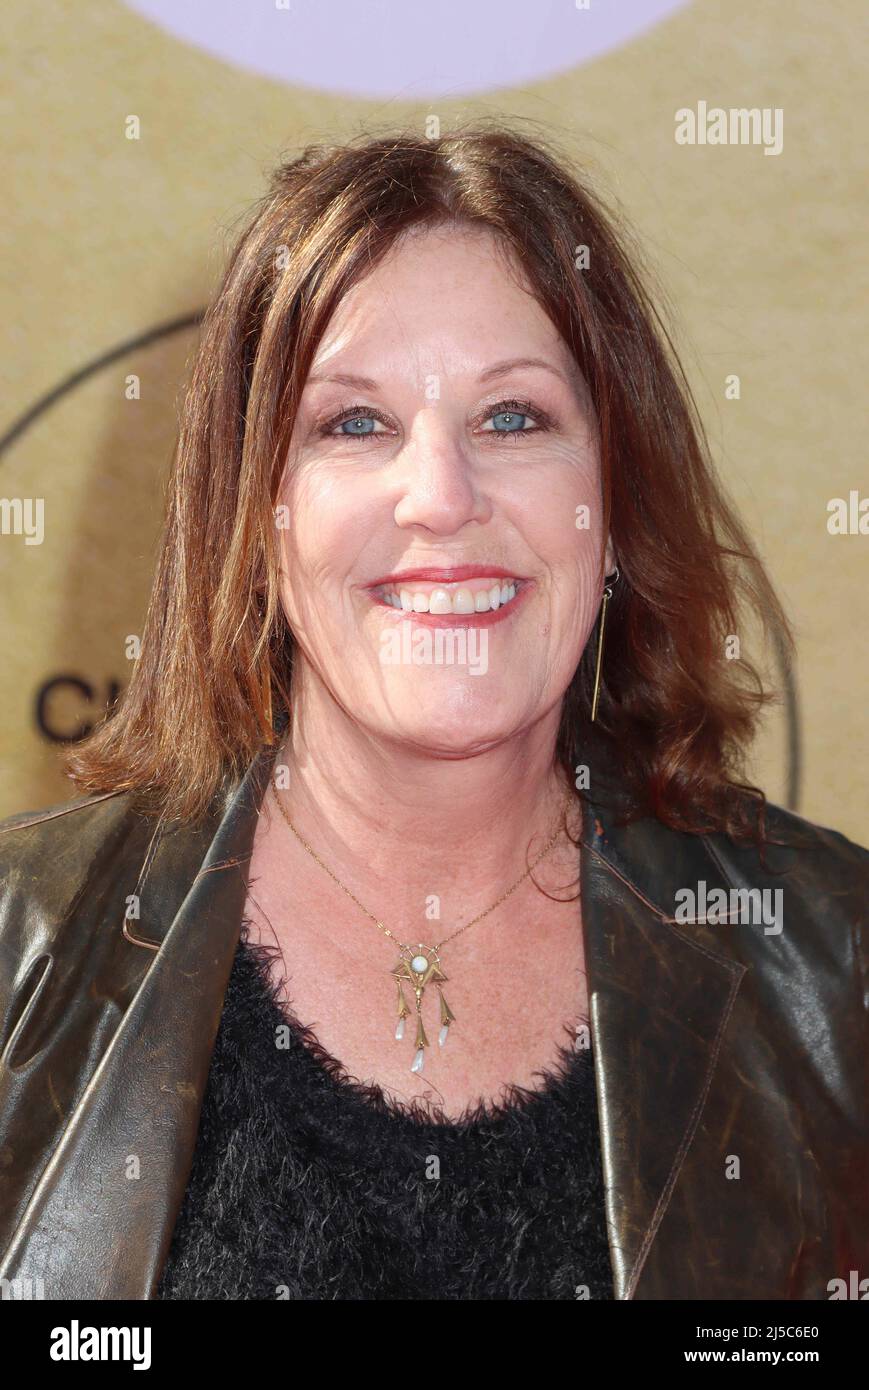 Los Angeles, USA. 21st Apr, 2022. Patti Pelton 2022/04/21 The 40th Anniversary Screening of “E.T. the Extra-Terrestrial” held at TCL Chinese Theatre in Hollywood, CA, Credit: Cronos/Alamy Live News Stock Photo